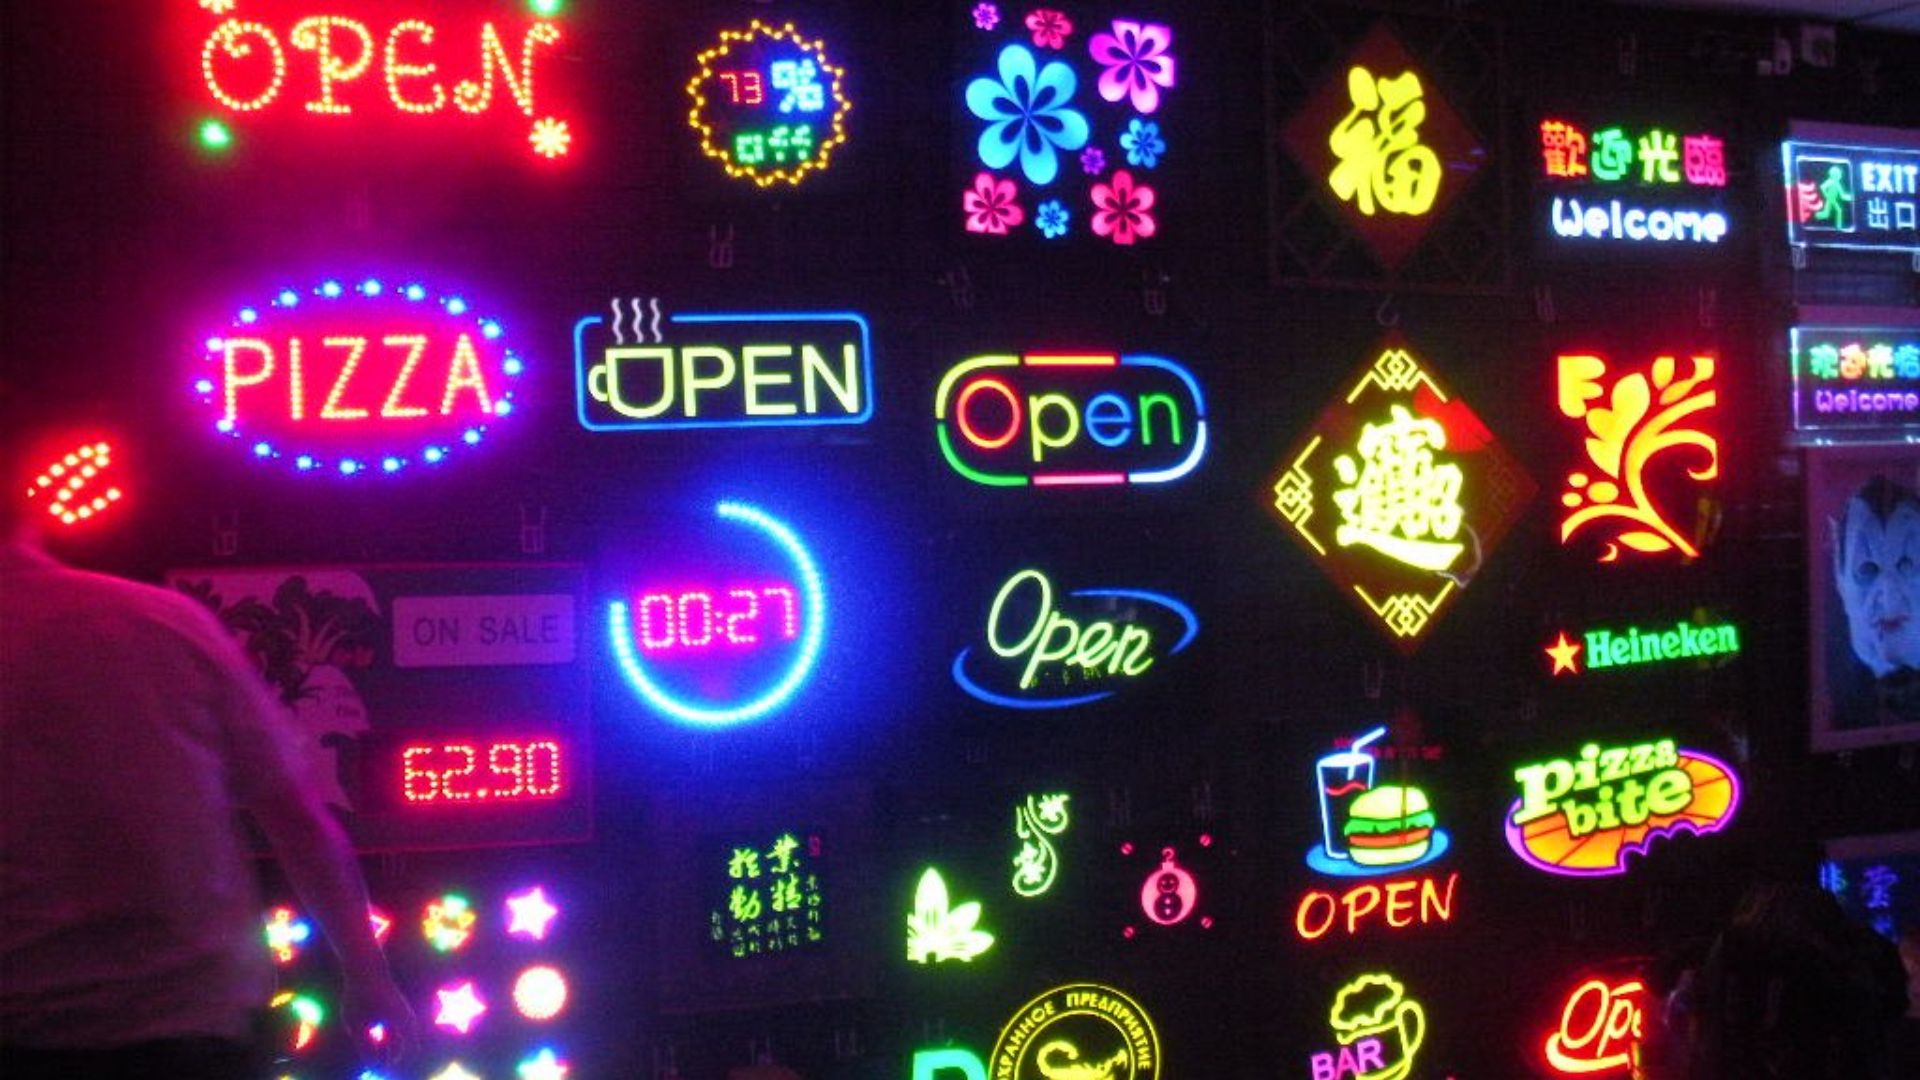 Creative Ways to Use LED Message Tickers